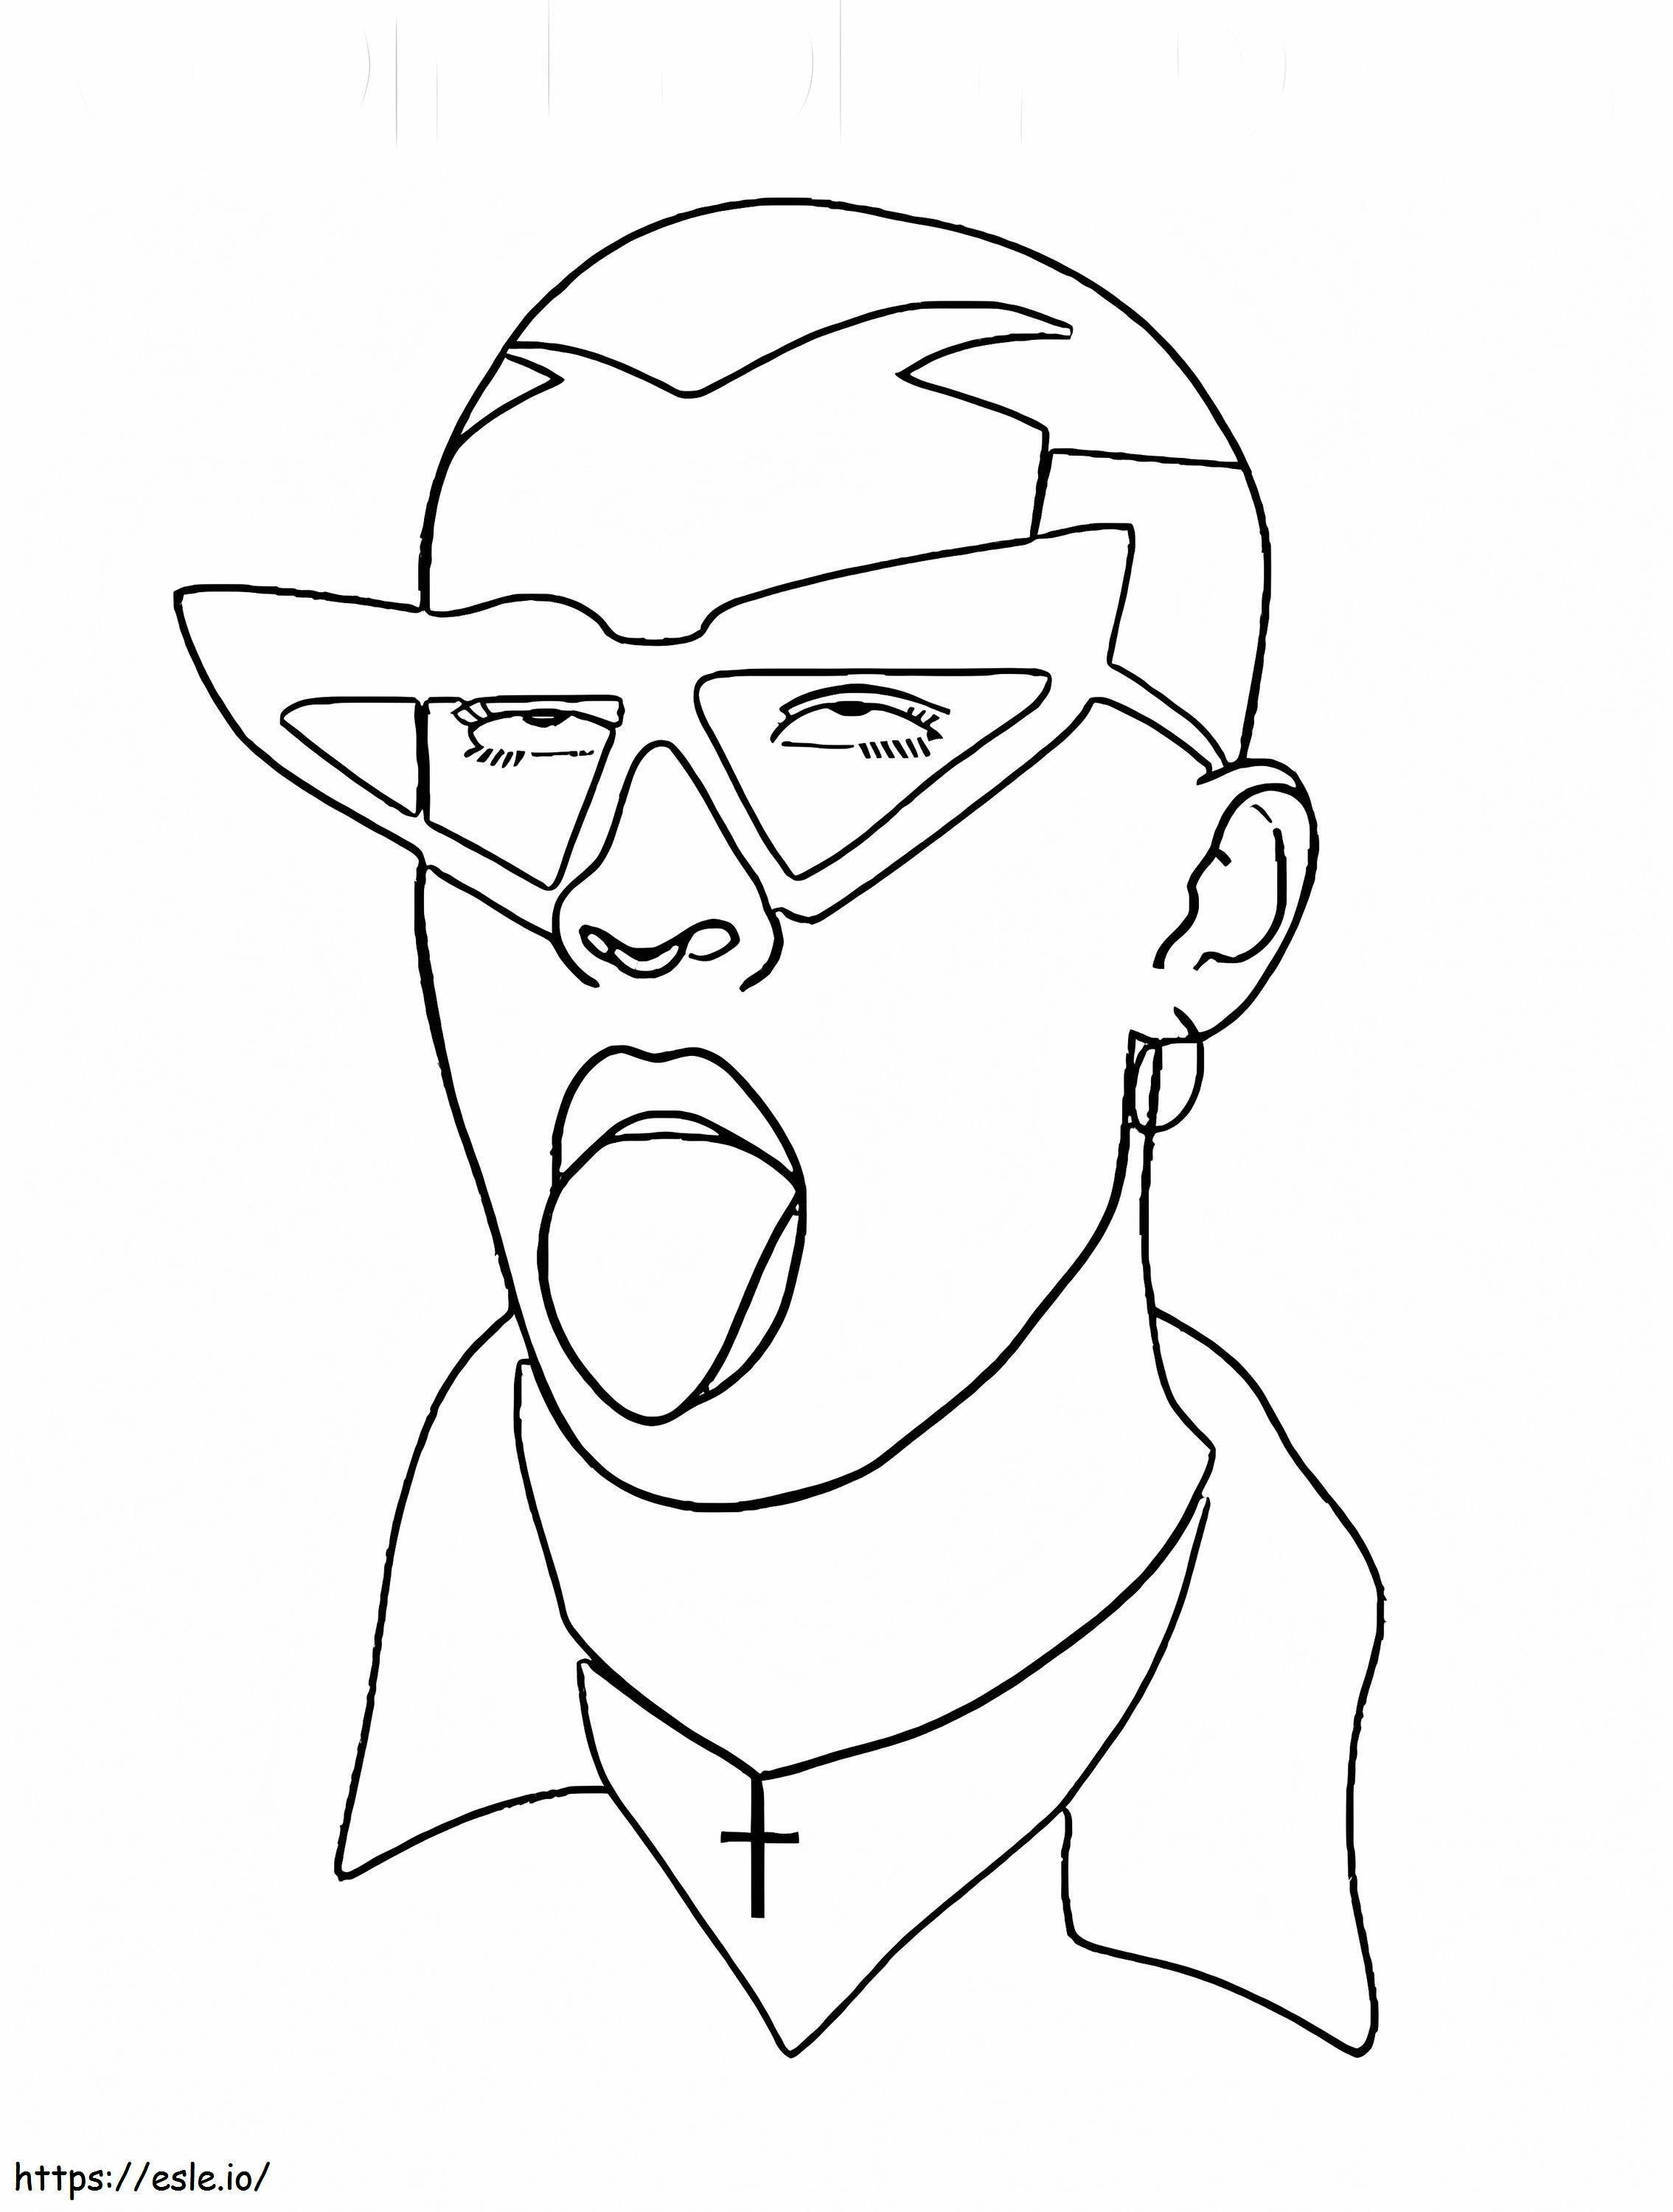 Bad Bunny With Glasses coloring page